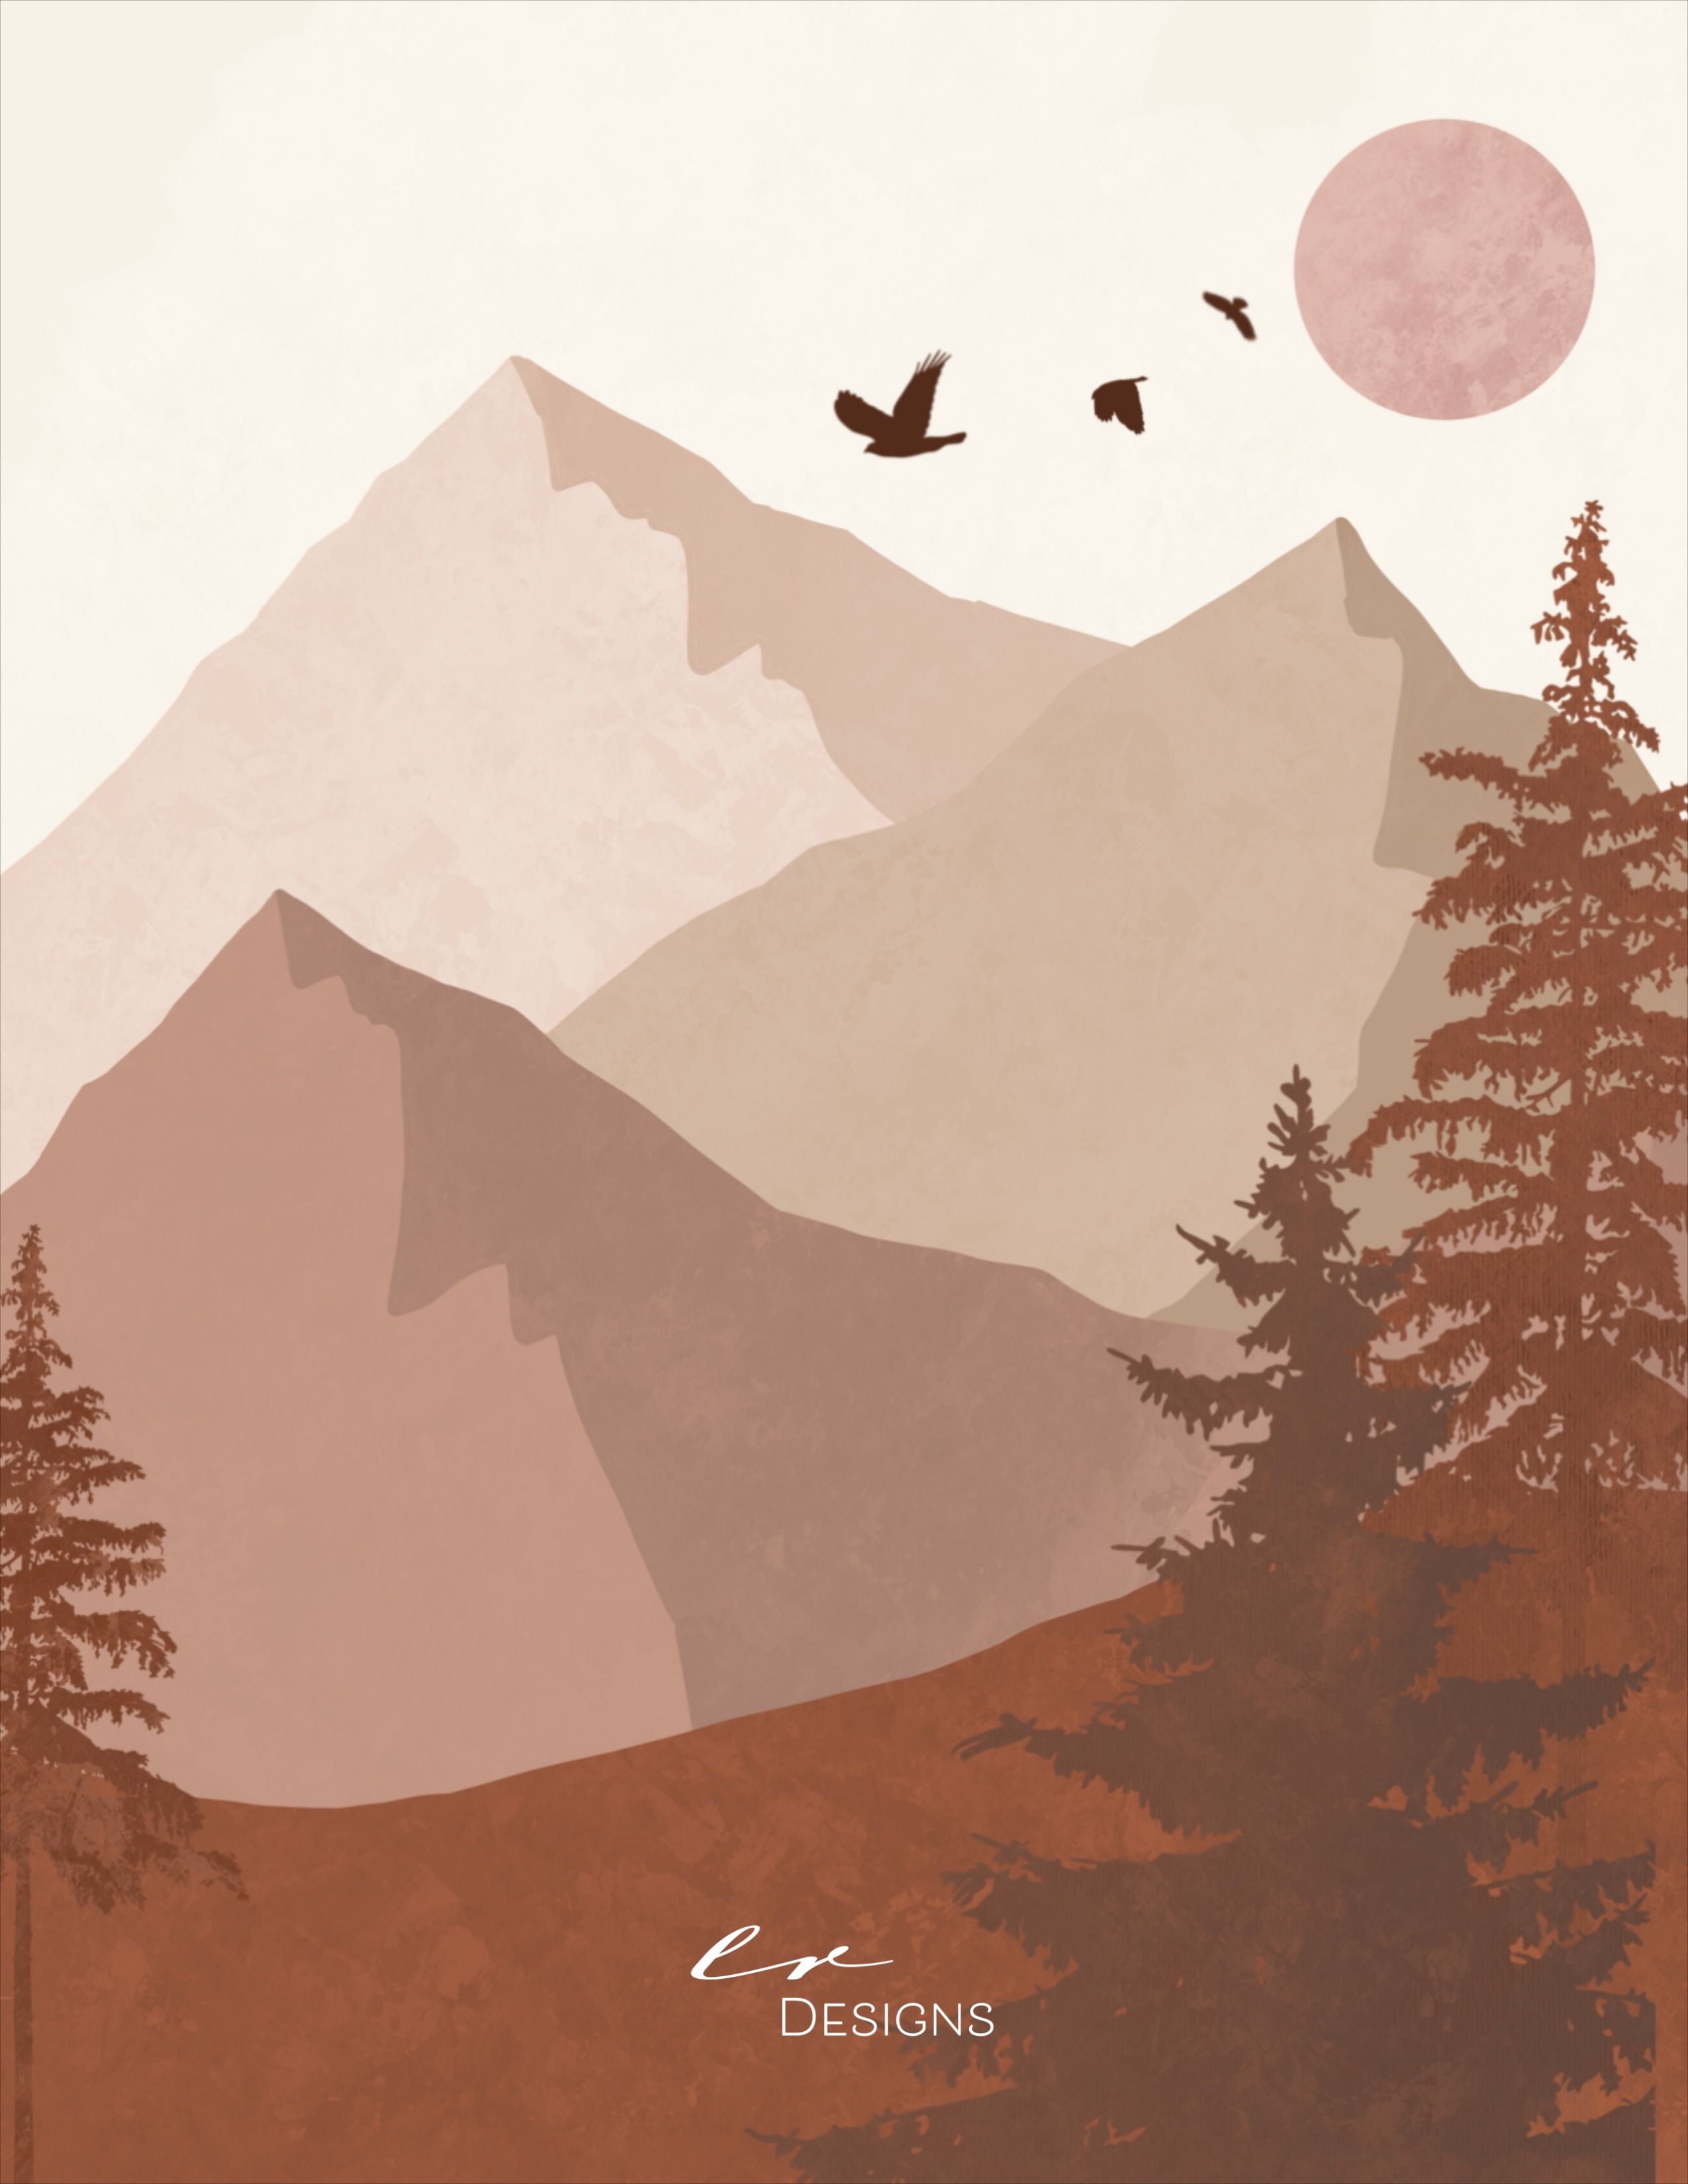 A brown and orange toned landscape illustration with mountains, trees, birds and the moon. - Mountain